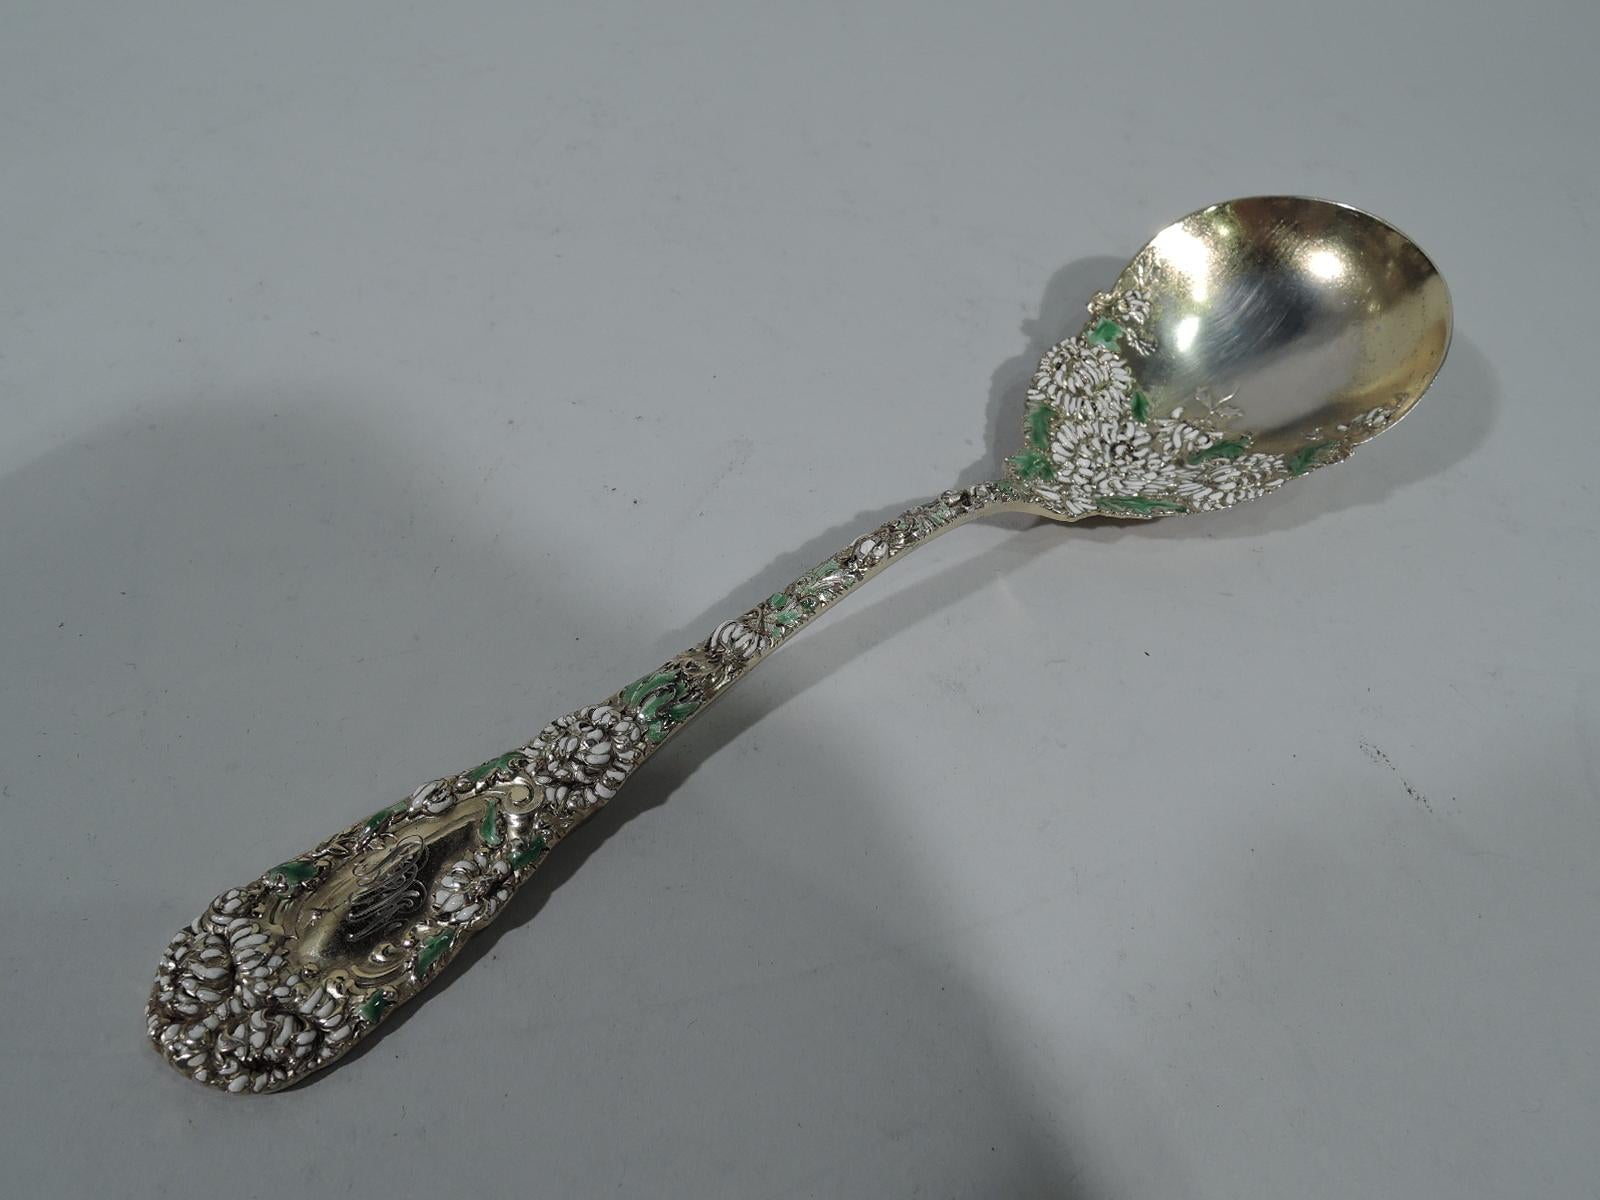 Antique Japonesque gilt sterling silver and enamel berry spoon in Chrysanthemum pattern. Made by Durgin in Concord, New Hampshire. Tapering handle with round terminal and oval scalloped bowl. Raised double-sided ornament comprising dense flower